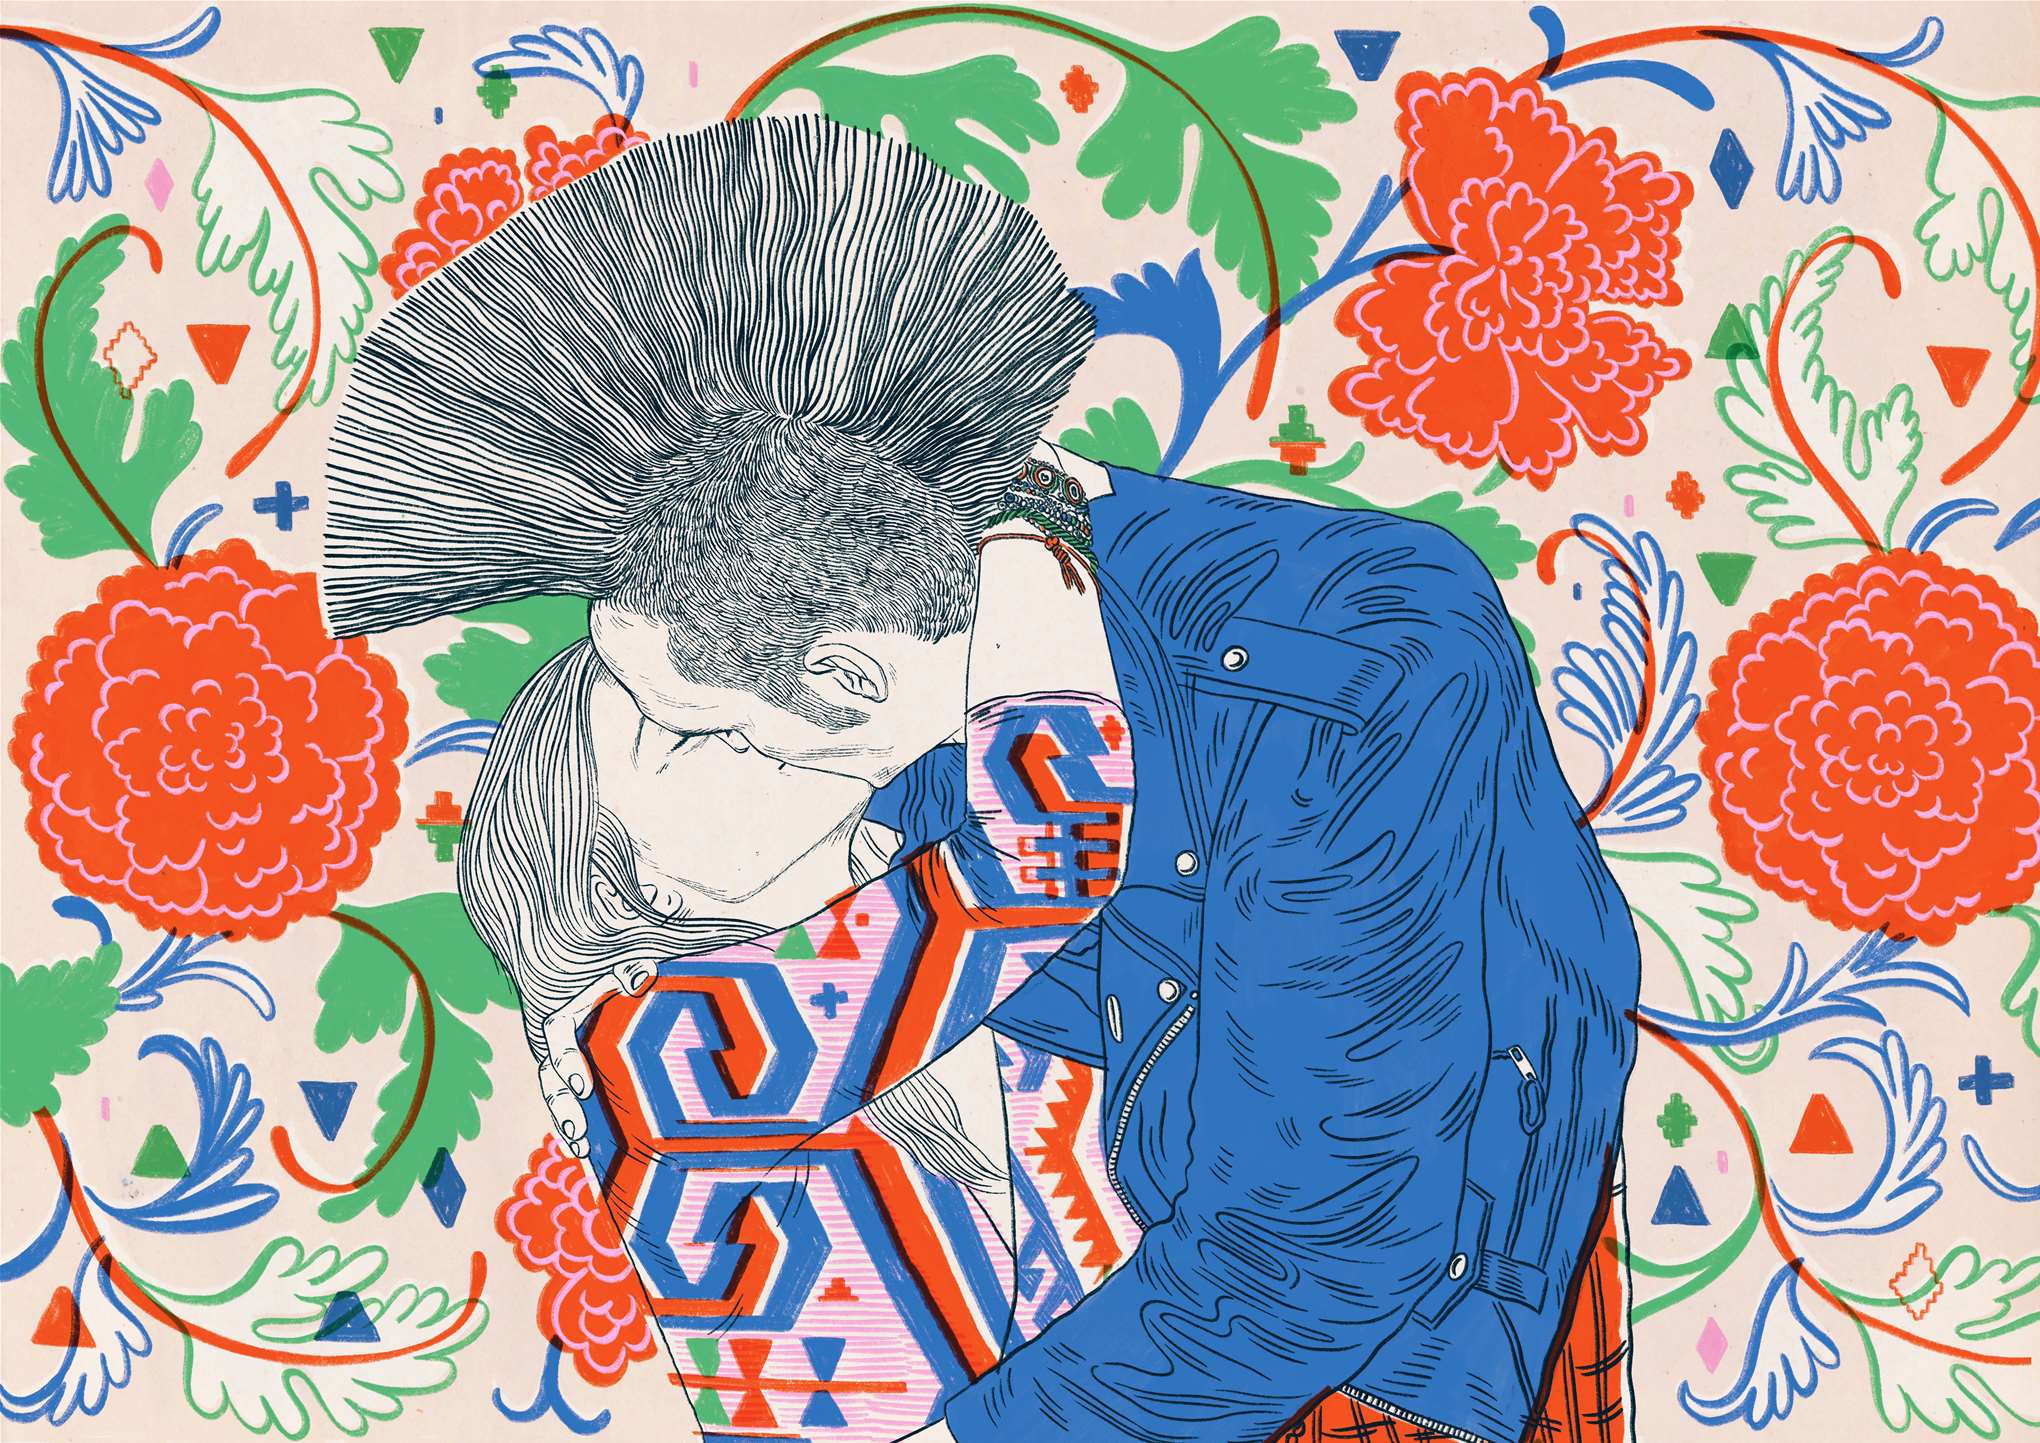 Anna Higgie, Portrait of 2 people kissing with botanical patterns in the background